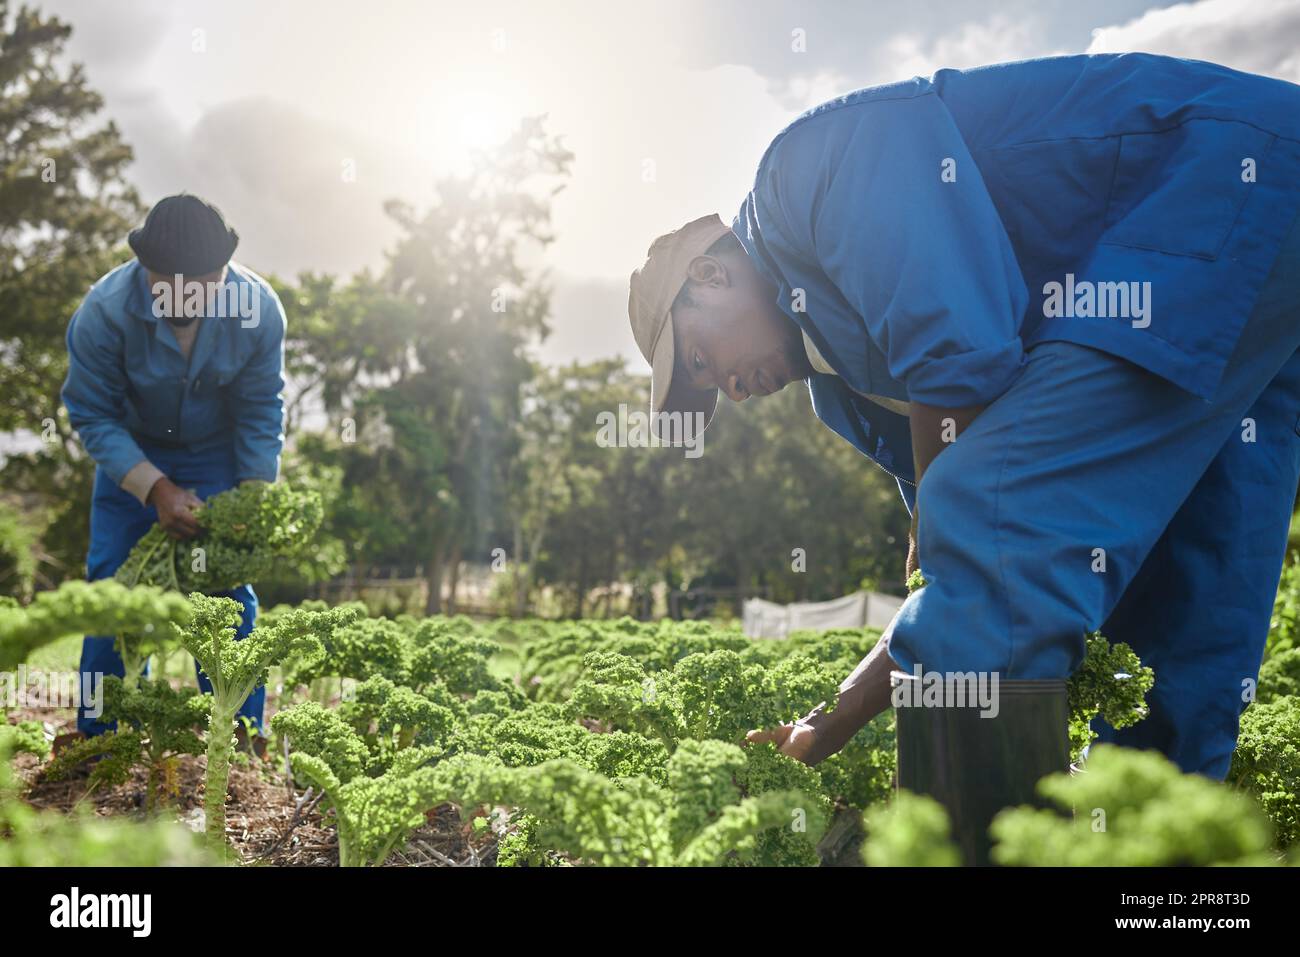 Its easy when you work together. two male farm workers tending to the crops. Stock Photo